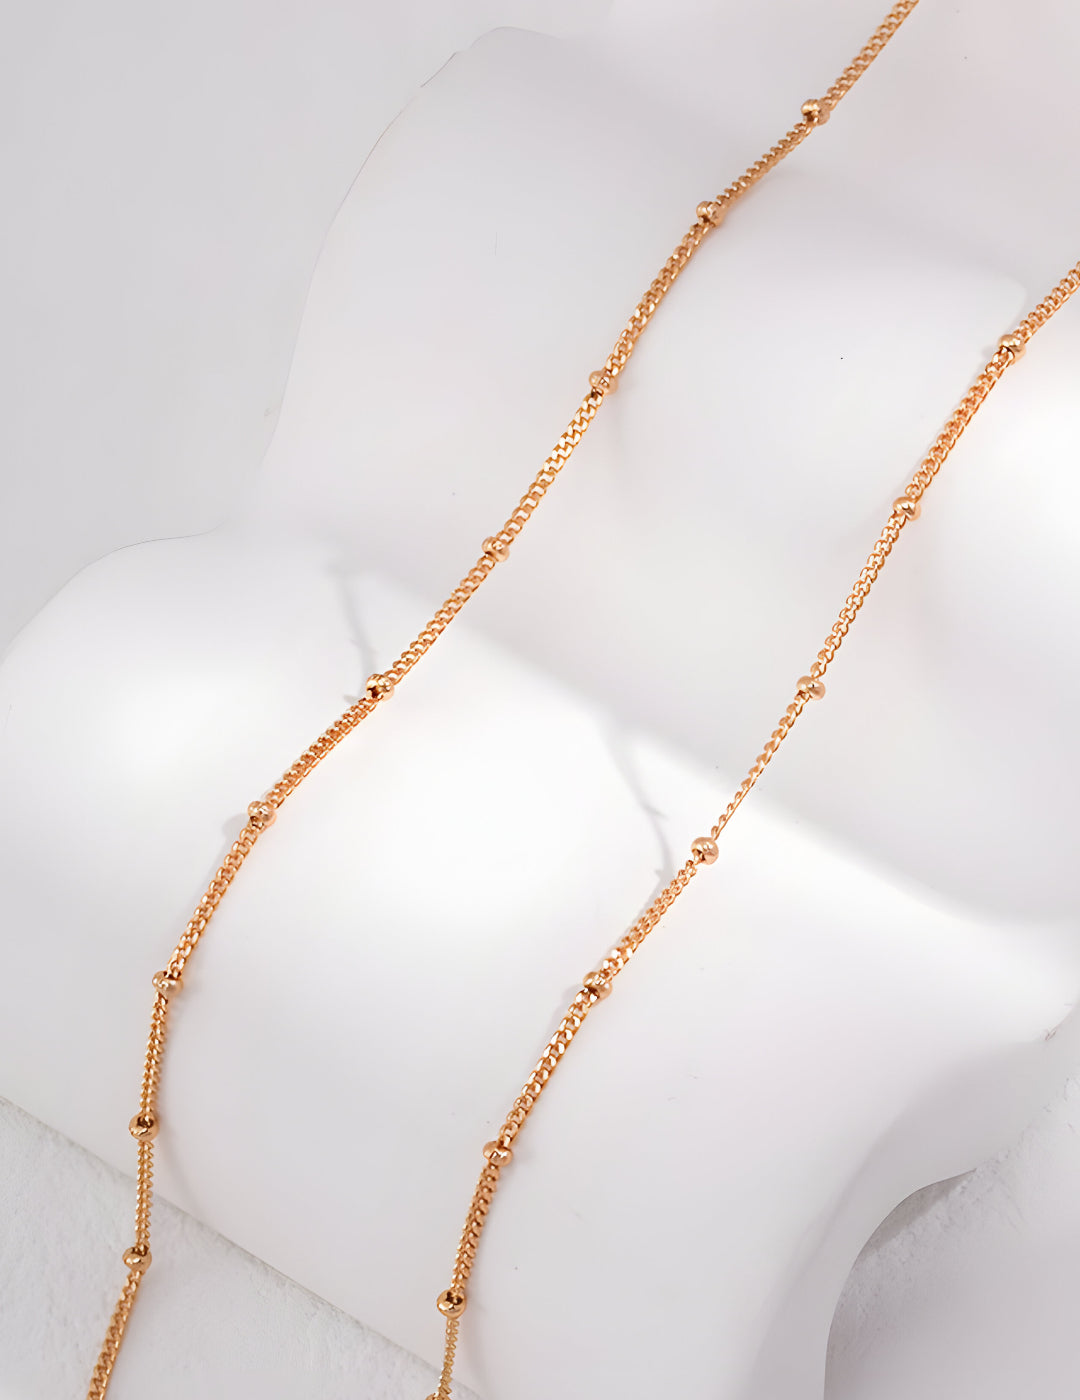 S925 Sterling Silver with 18K Gold Vermeil chain necklace - Adorn it in your own way-  simple yet sophisticated design effortlessly complements any outfit, making it a go-to accessory for any occasion